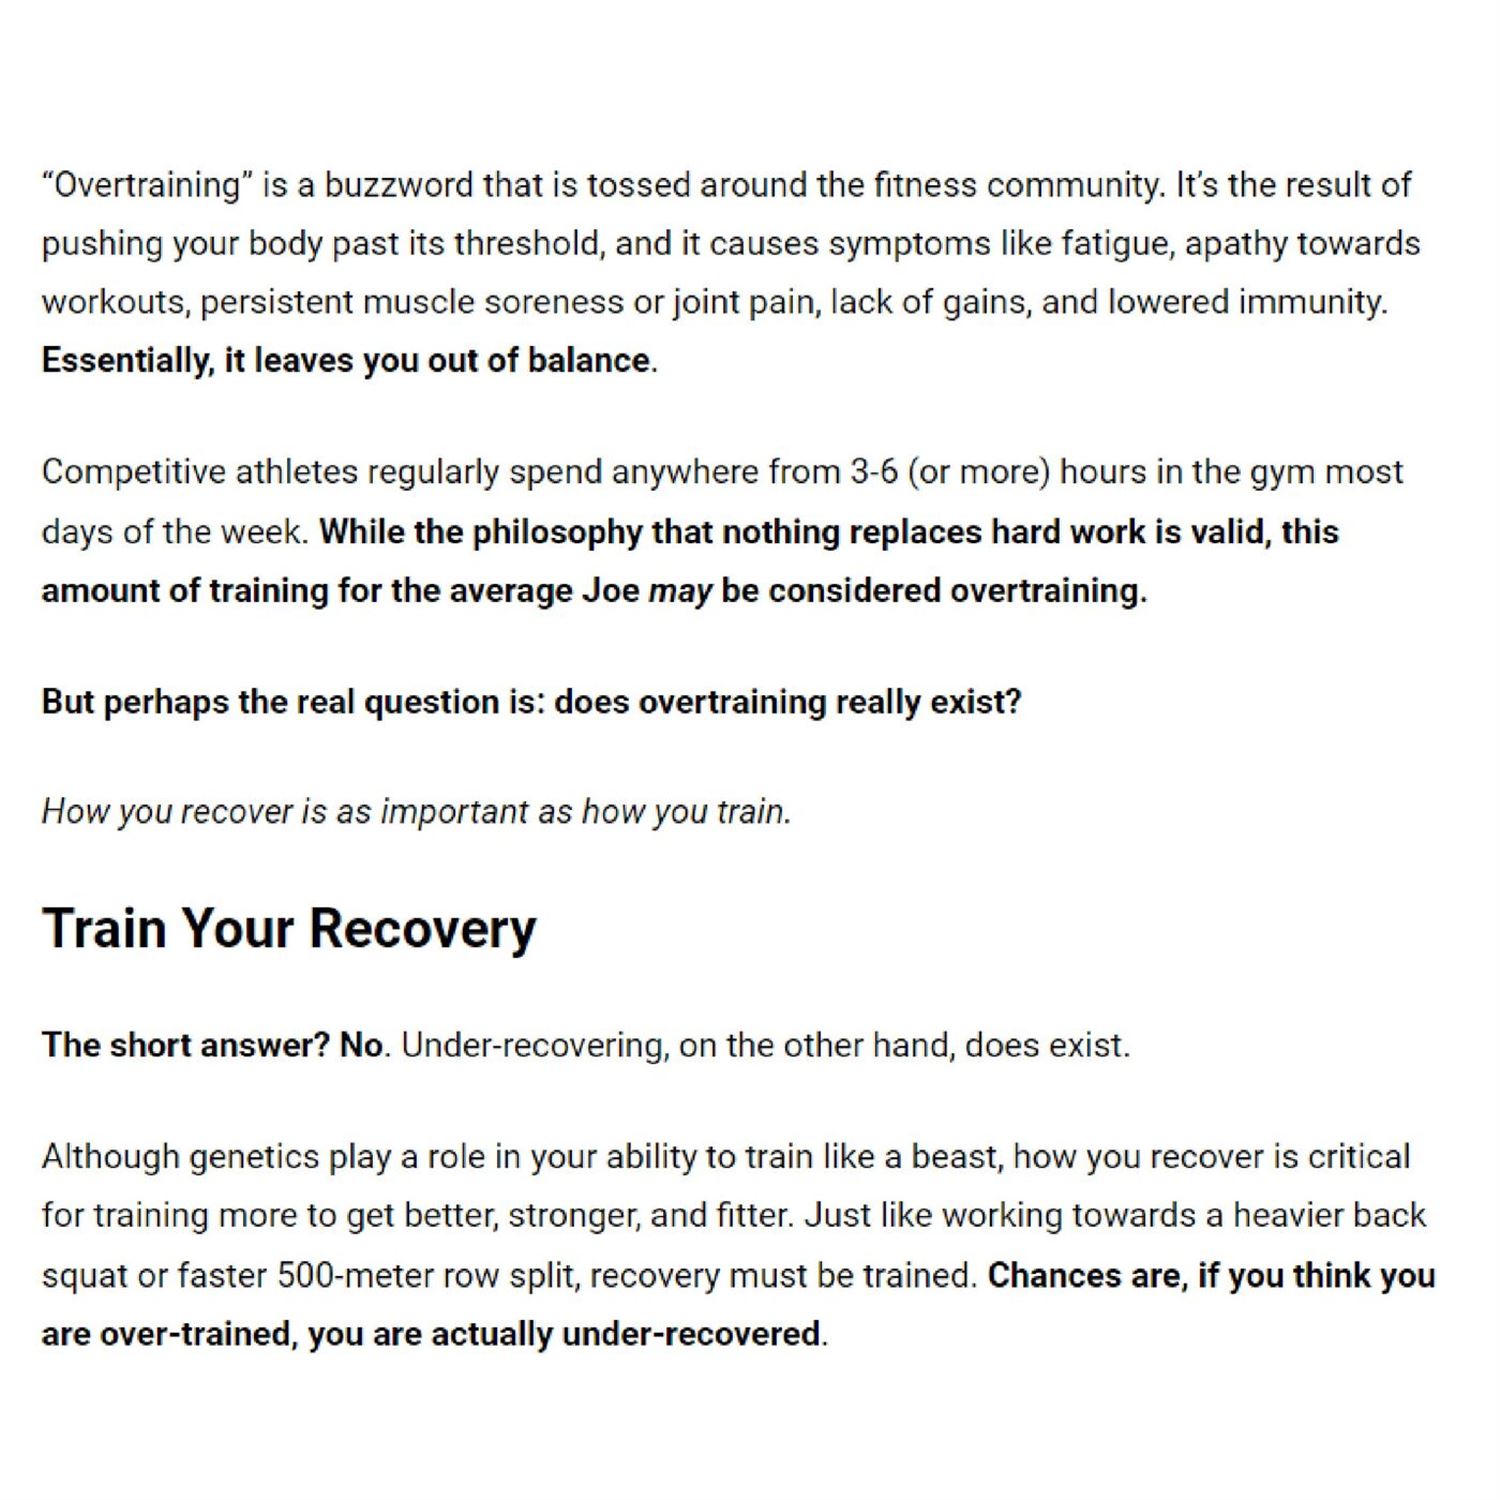 Overtraining vs Under recovery